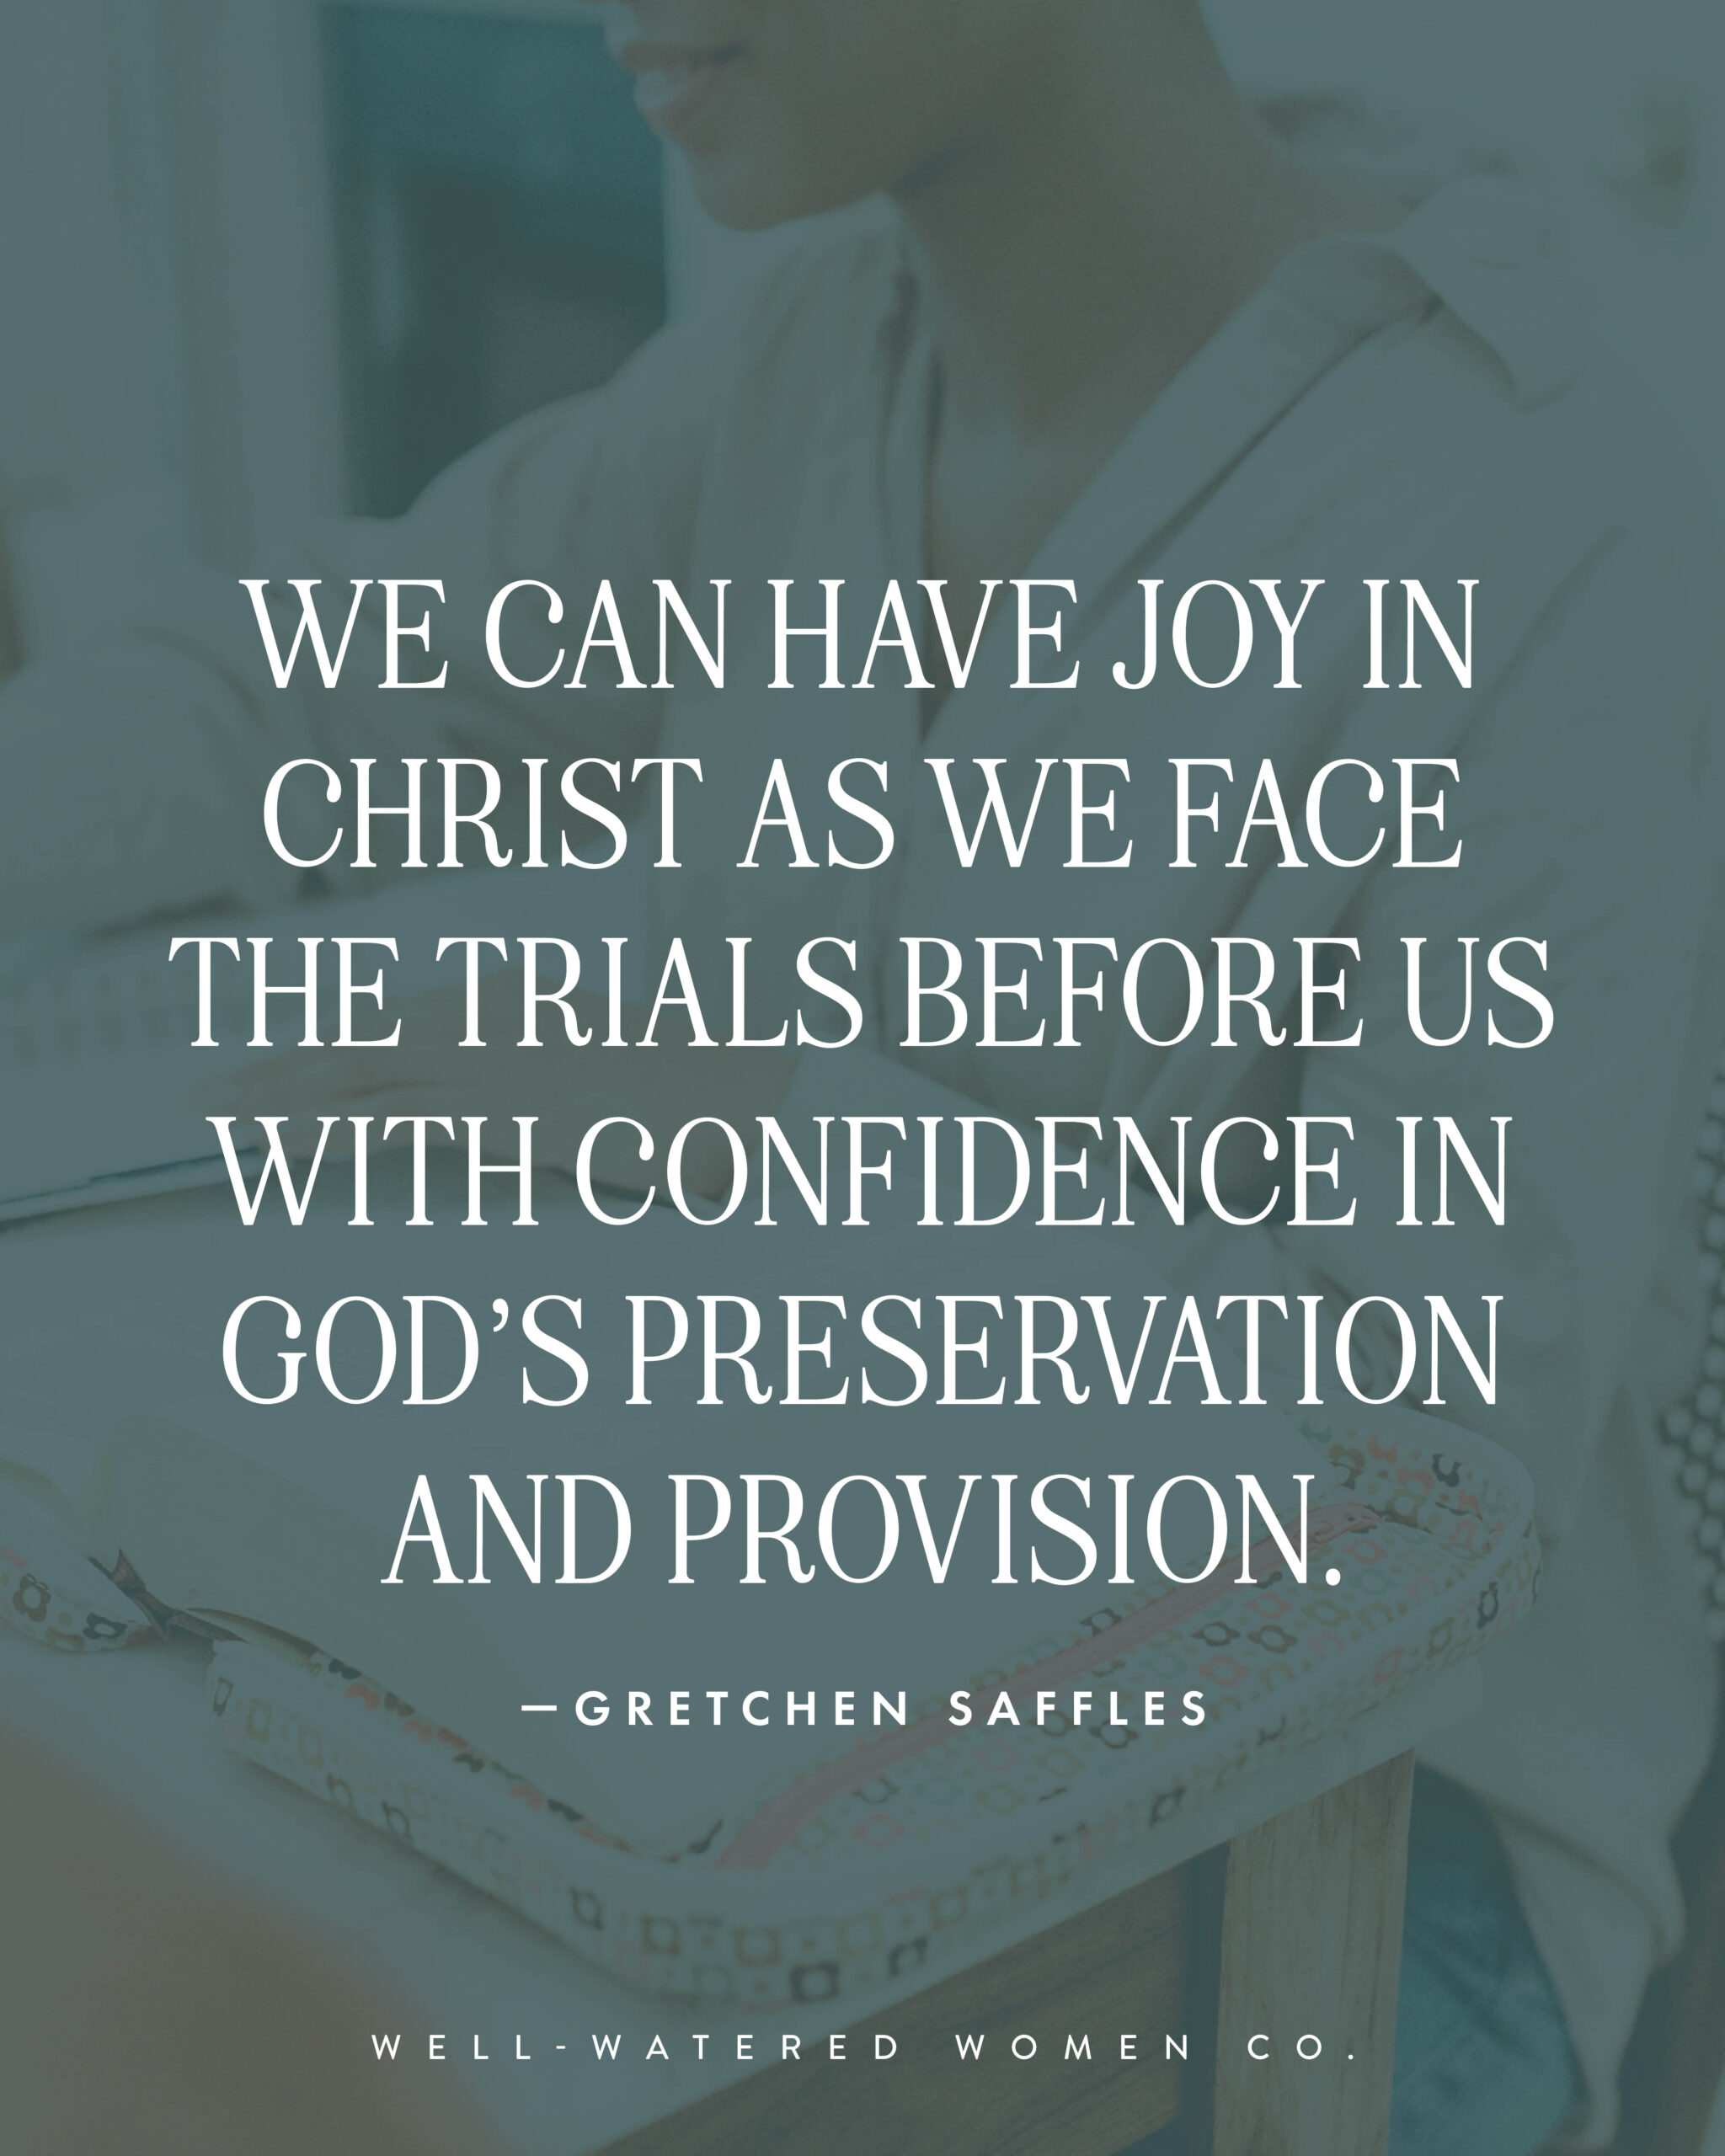 Rejoicing in God's Presence - an article from Well-Watered Women - quote